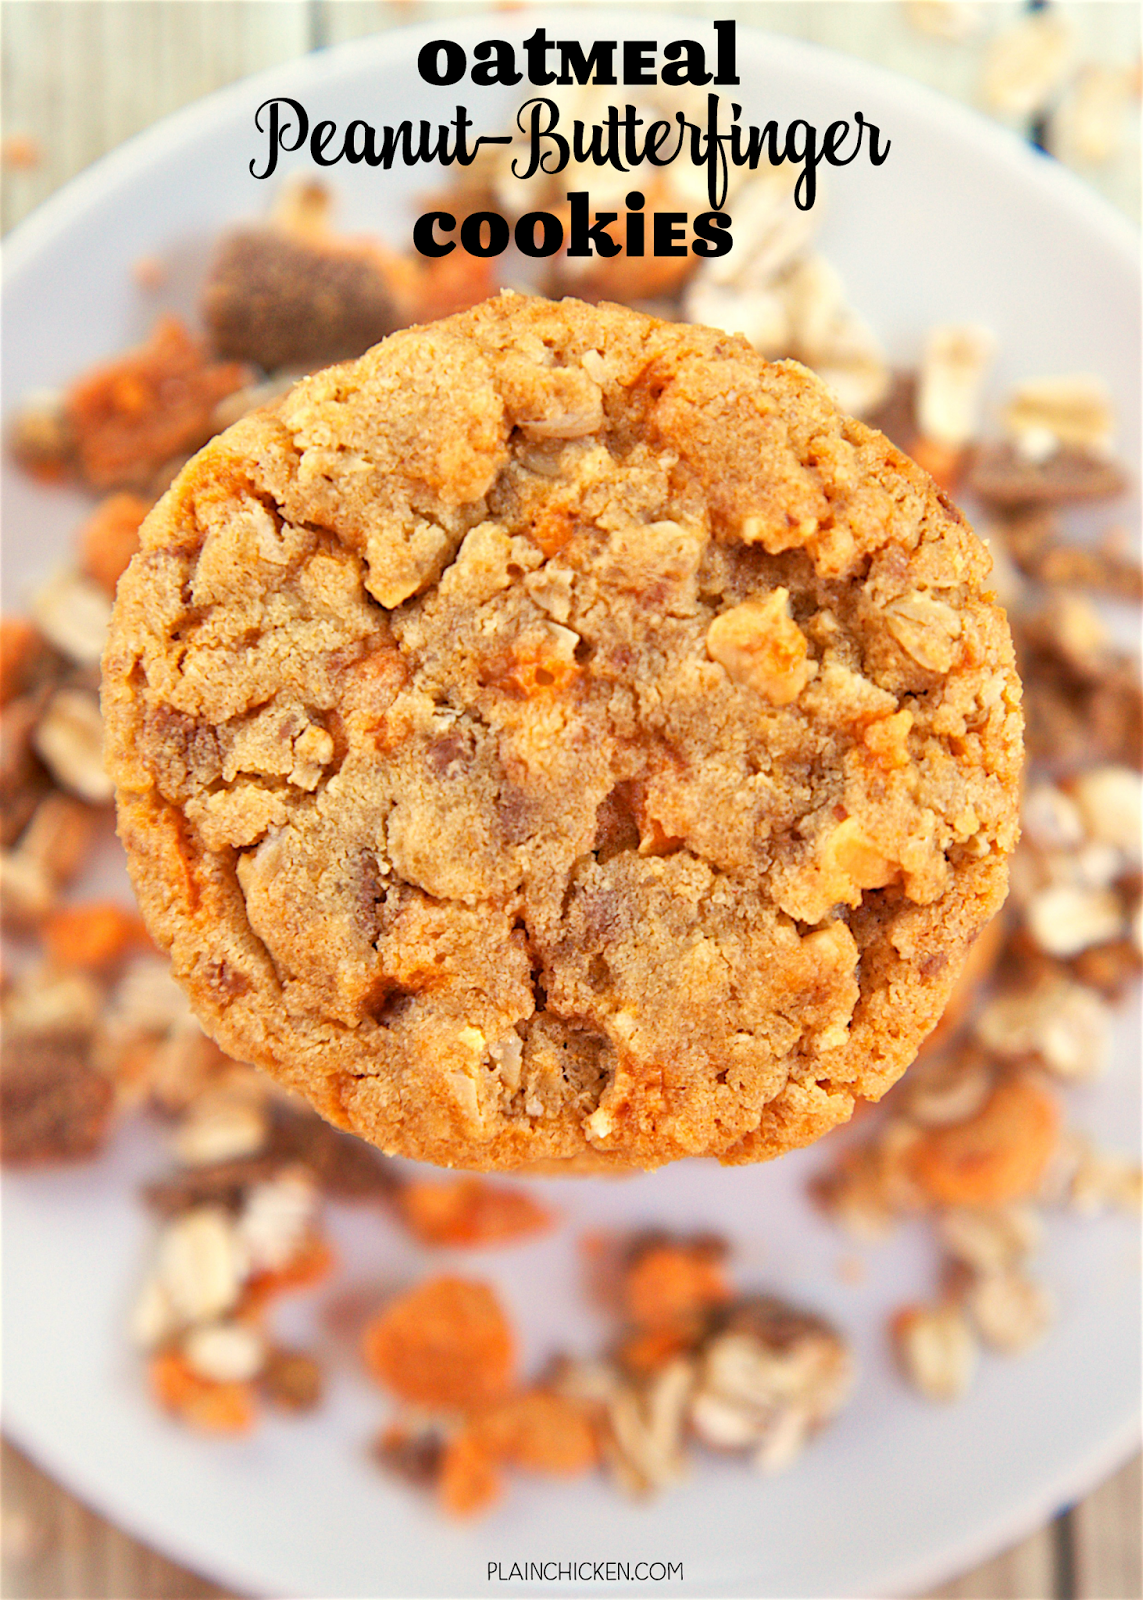 Oatmeal Peanut-Butterfinger Cookies  - peanut butter, oatmeal, Butterfinger bits, eggs, flour, baking soda, brown sugar, white sugar and the secret ingredient - LouAna® 100% Pure Coconut Oil. Our new FAVORITE cookie! I love everything about these cookies!! Can make ahead and freeze dough for later. Took these to a party and they were gone in a flash!